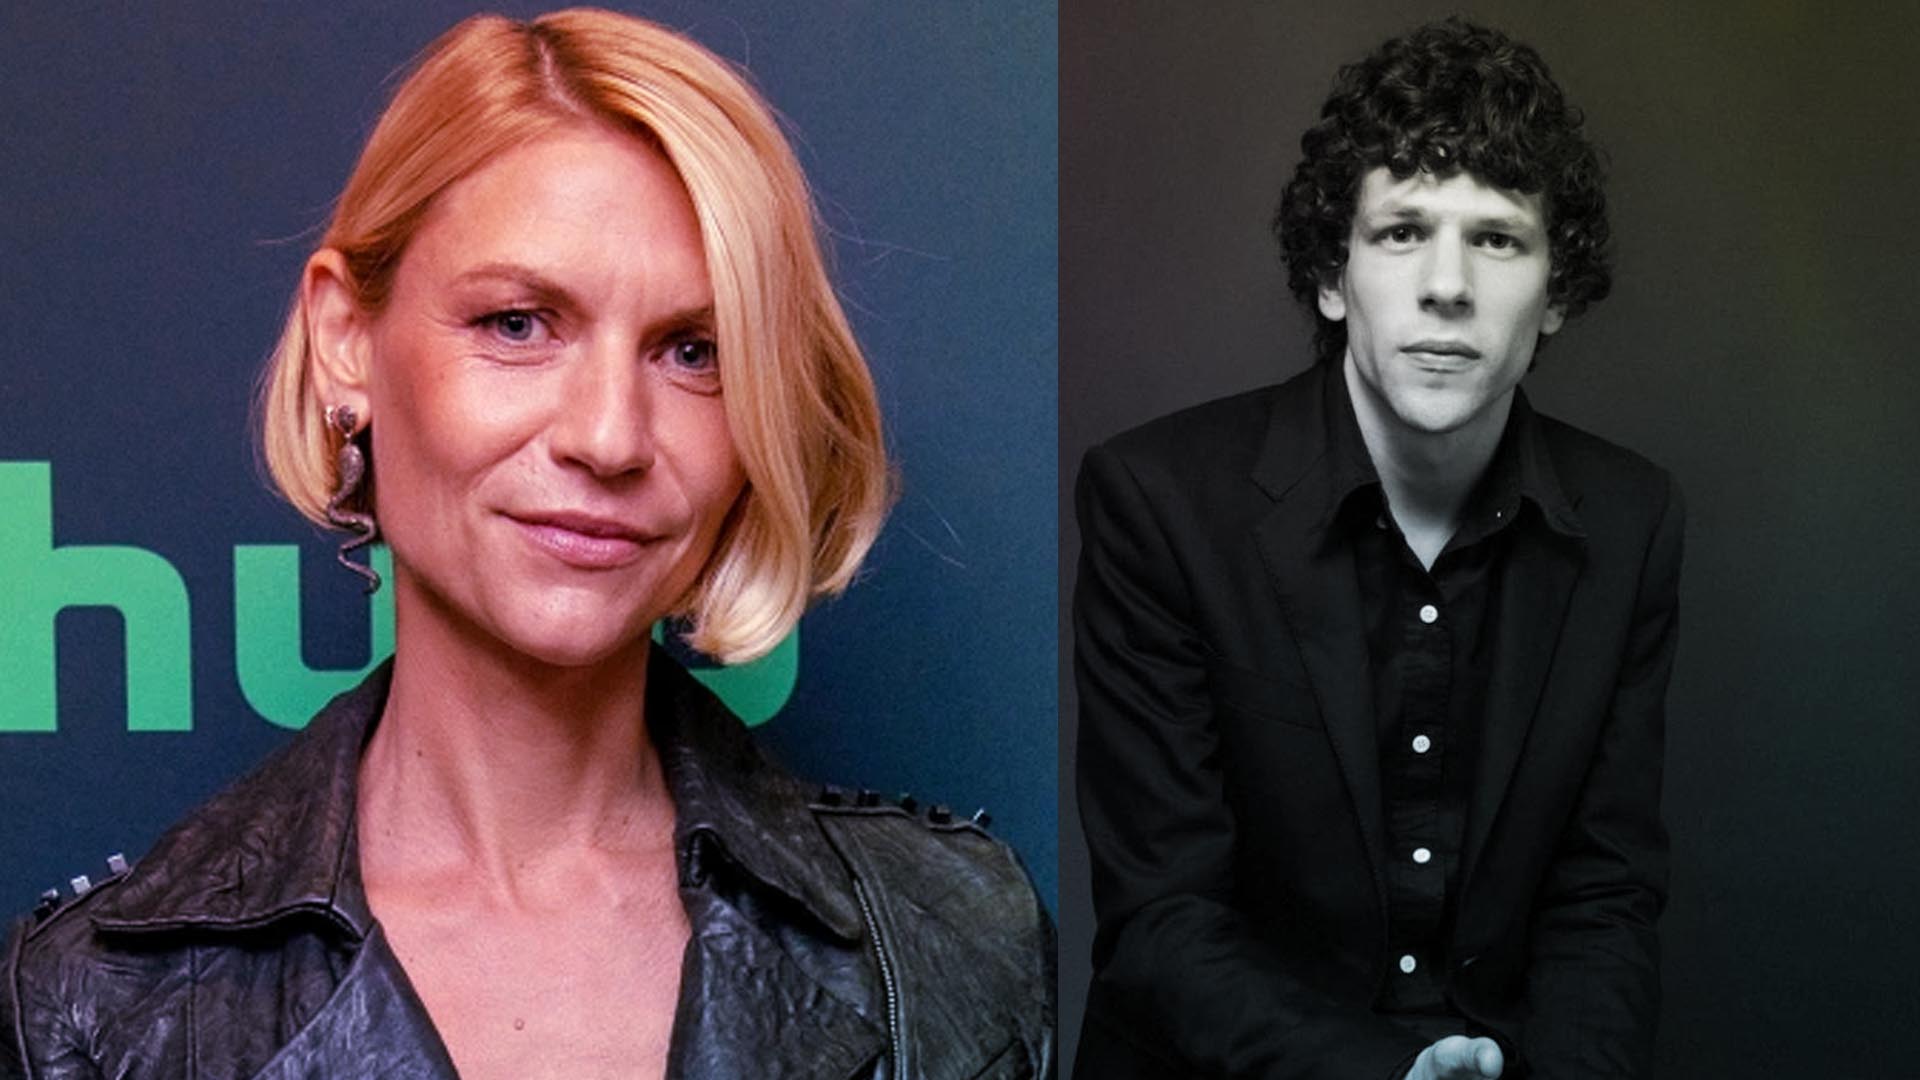 Claire Danes to join Jesse Eisenberg